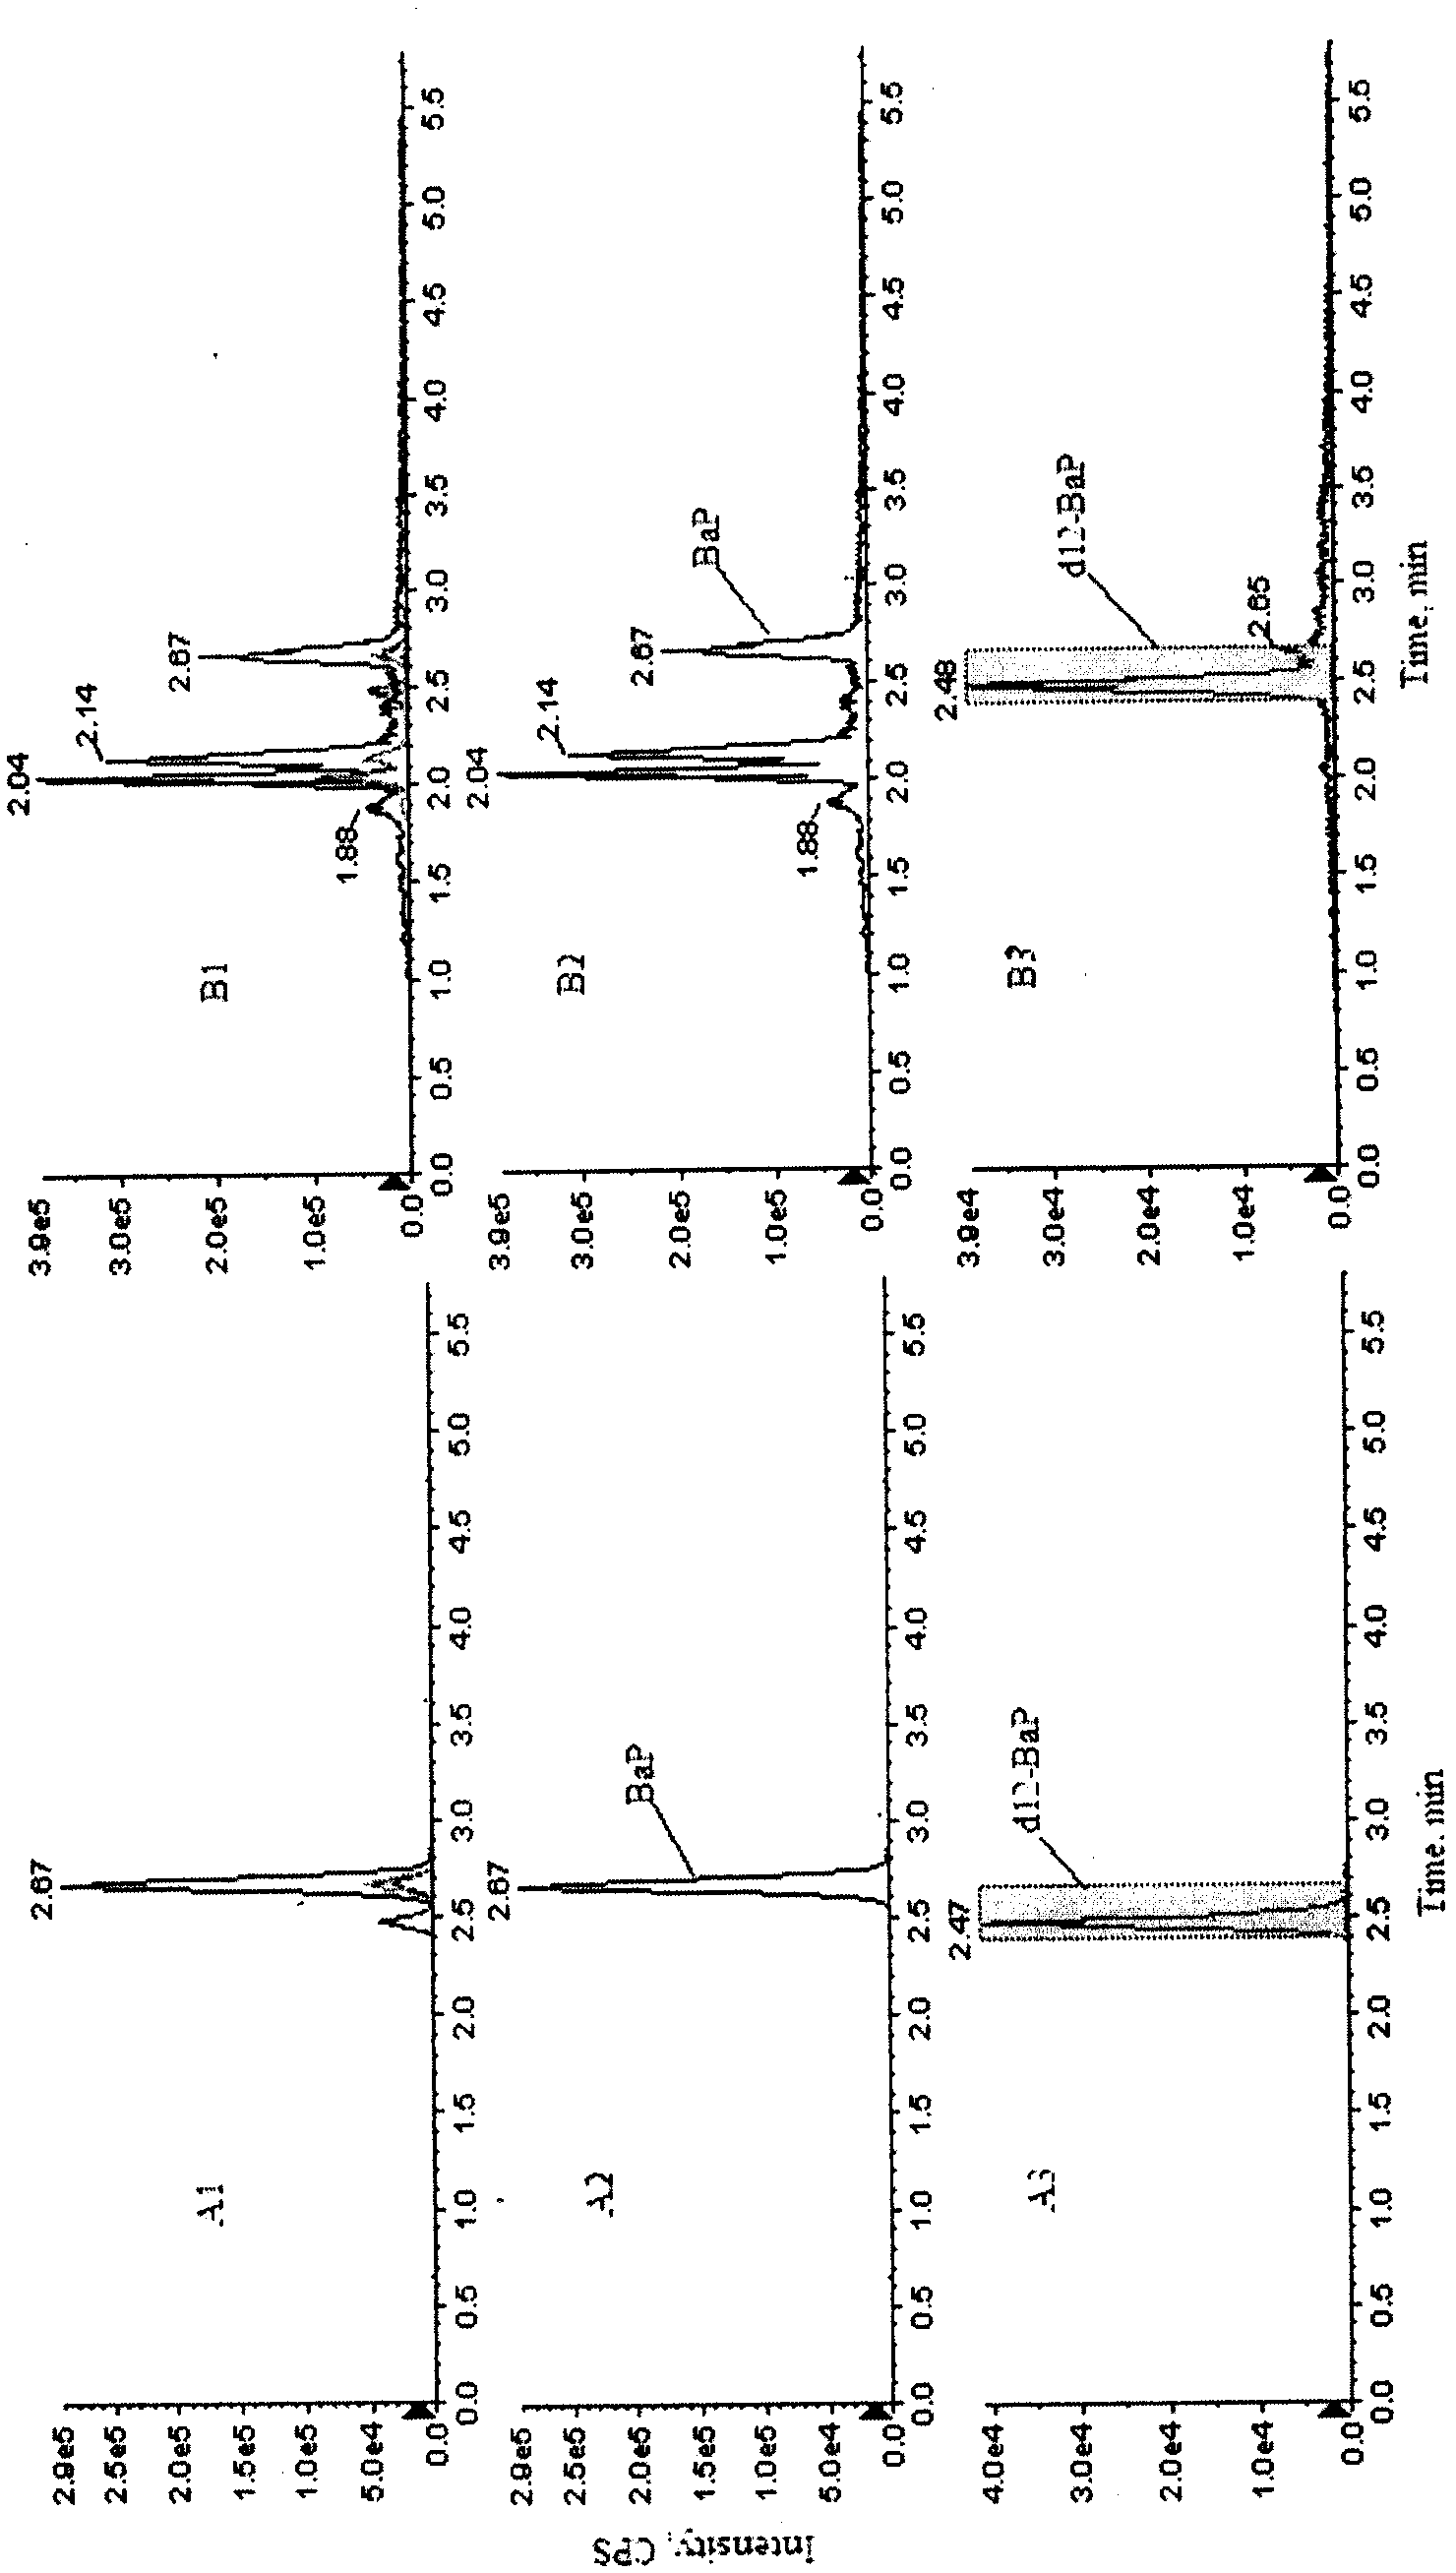 Method for measuring content of benzo-a-pyrene in mainstream smoke of cigarettes